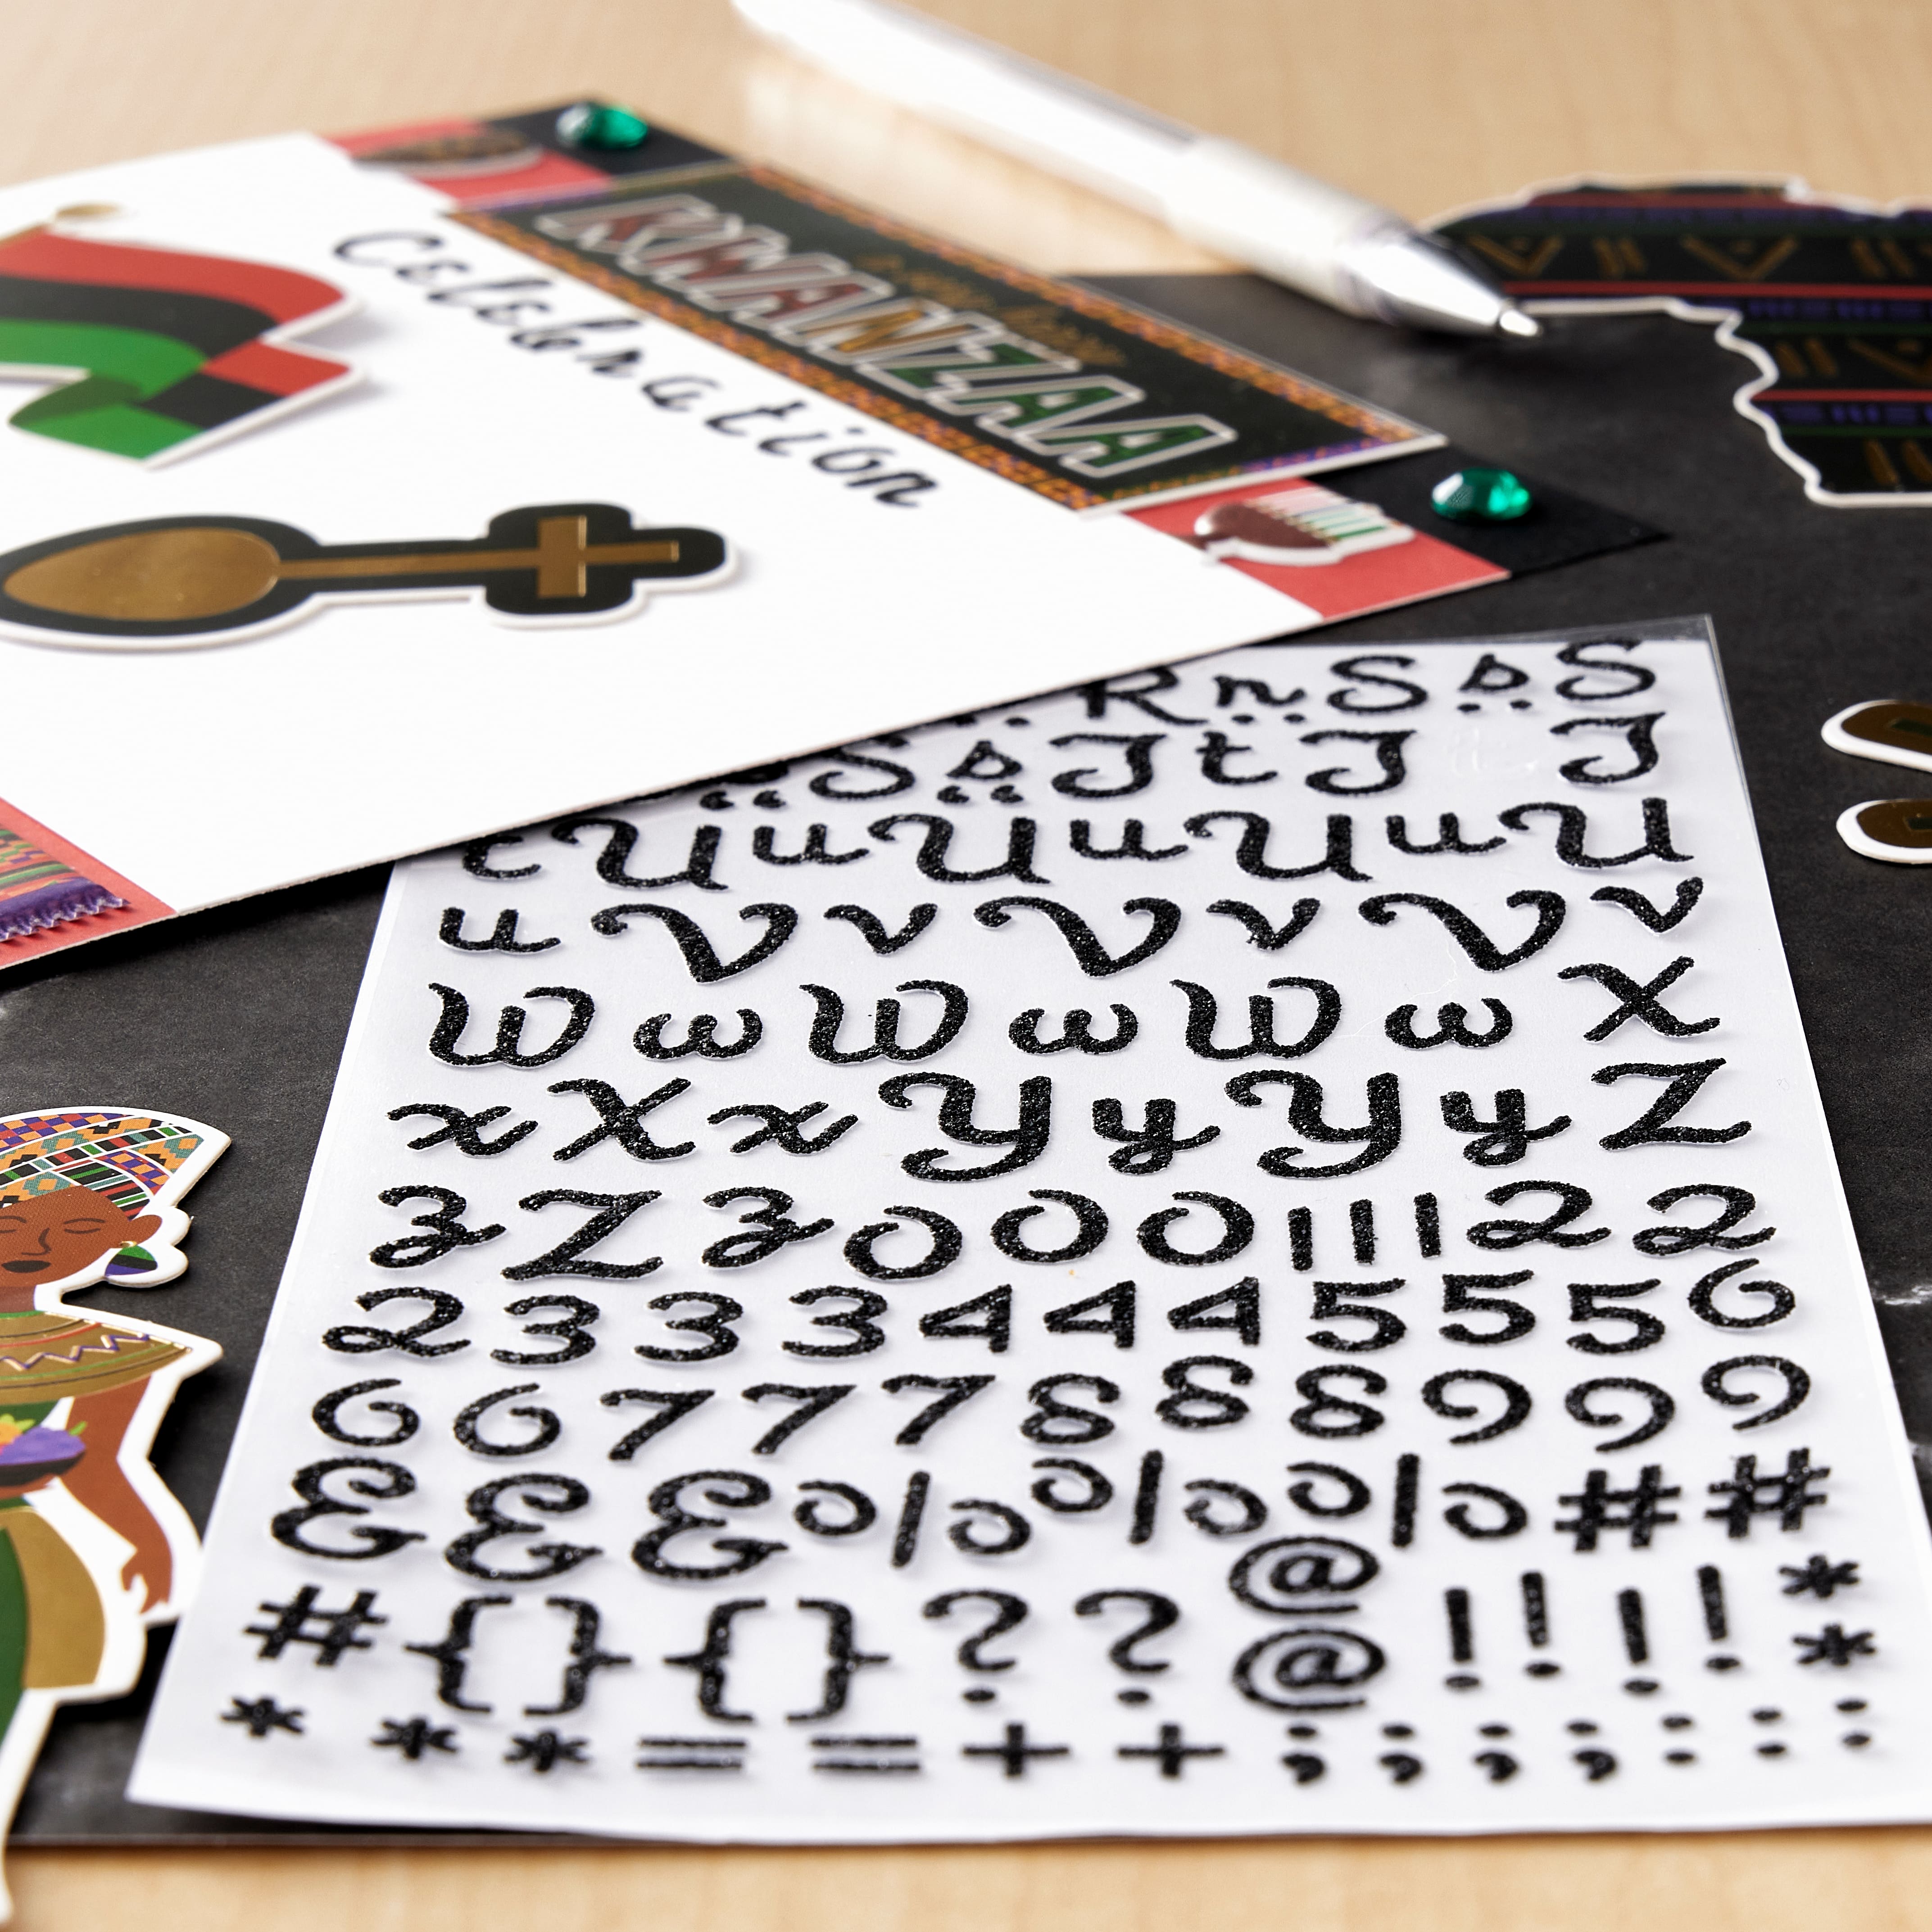 12 Packs: 104 ct. (1,248 total) White Glitter Script Alphabet Stickers by  Recollections™